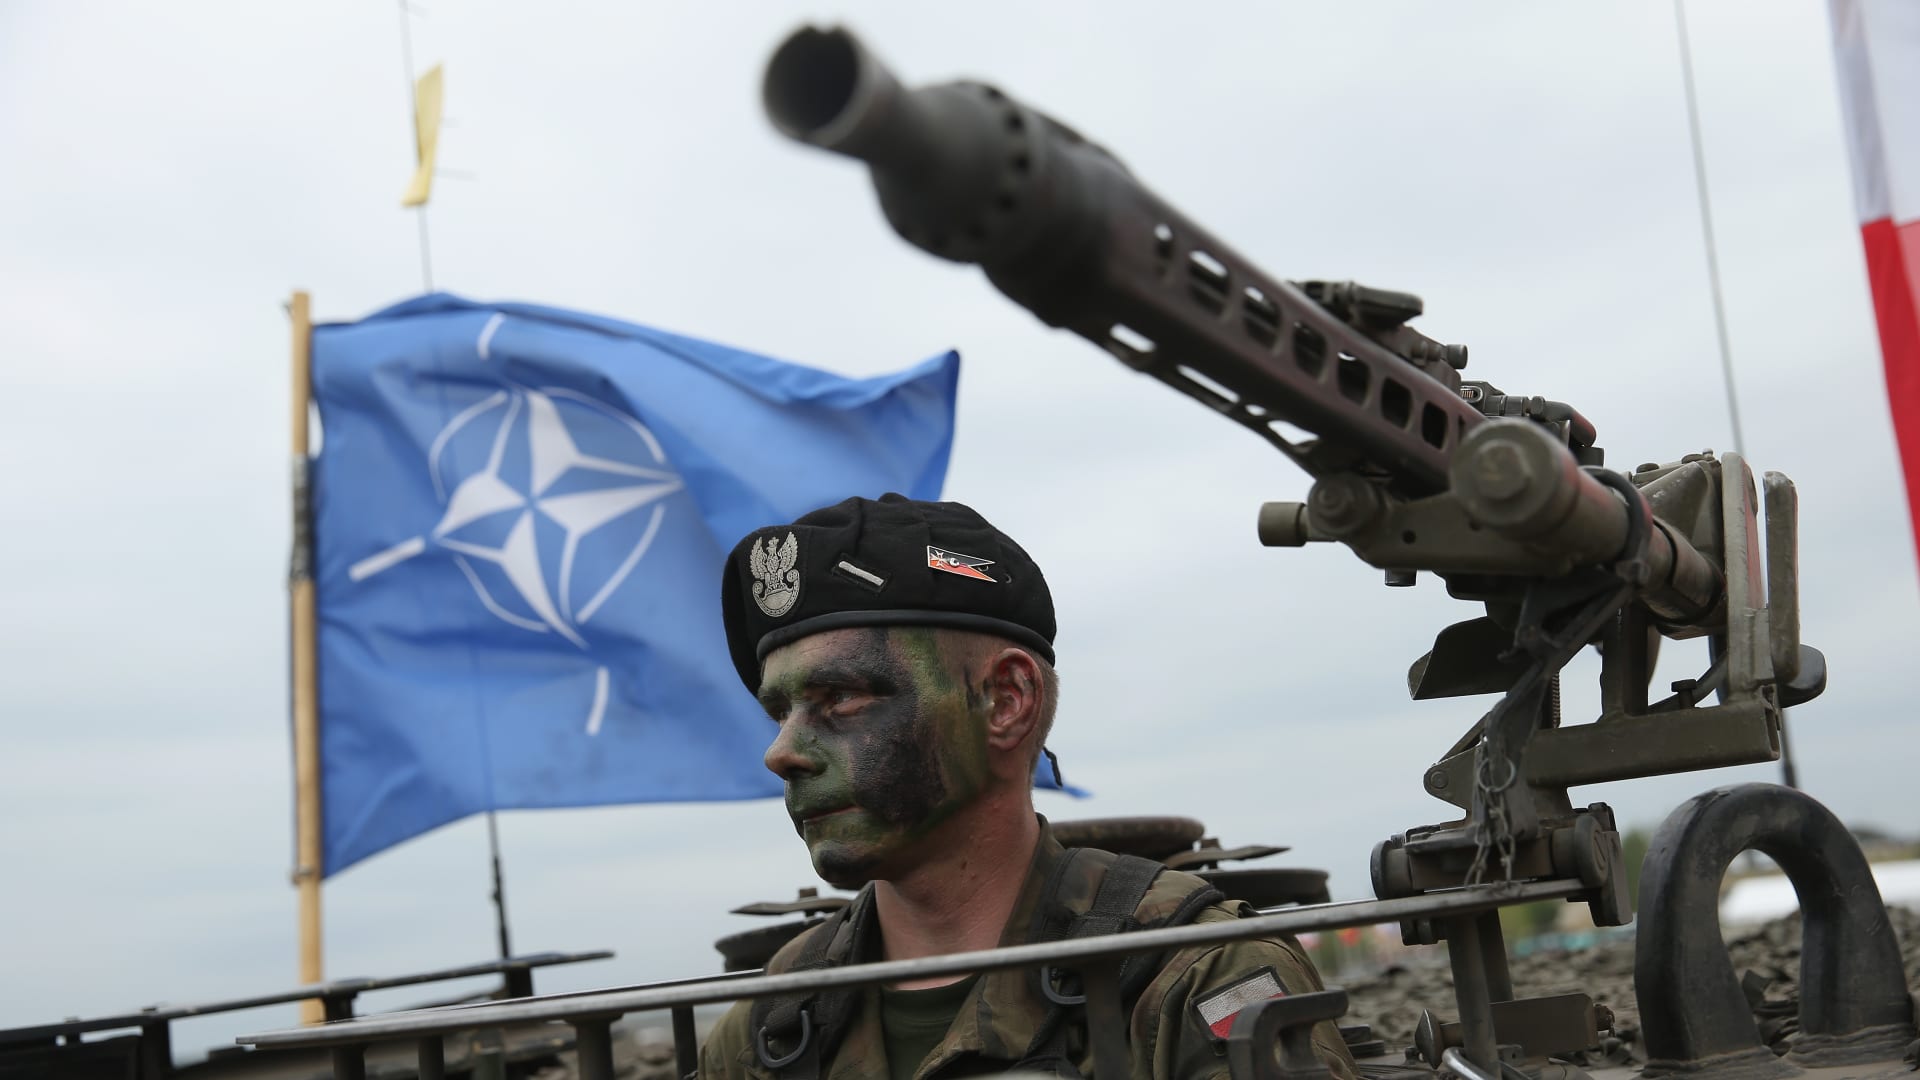 A soldier of the Polish Army sits in a tank as a NATO flag flies behind during the NATO Noble Jump military exercises of the VJTF forces on June 18, 2015 in Zagan, Poland.